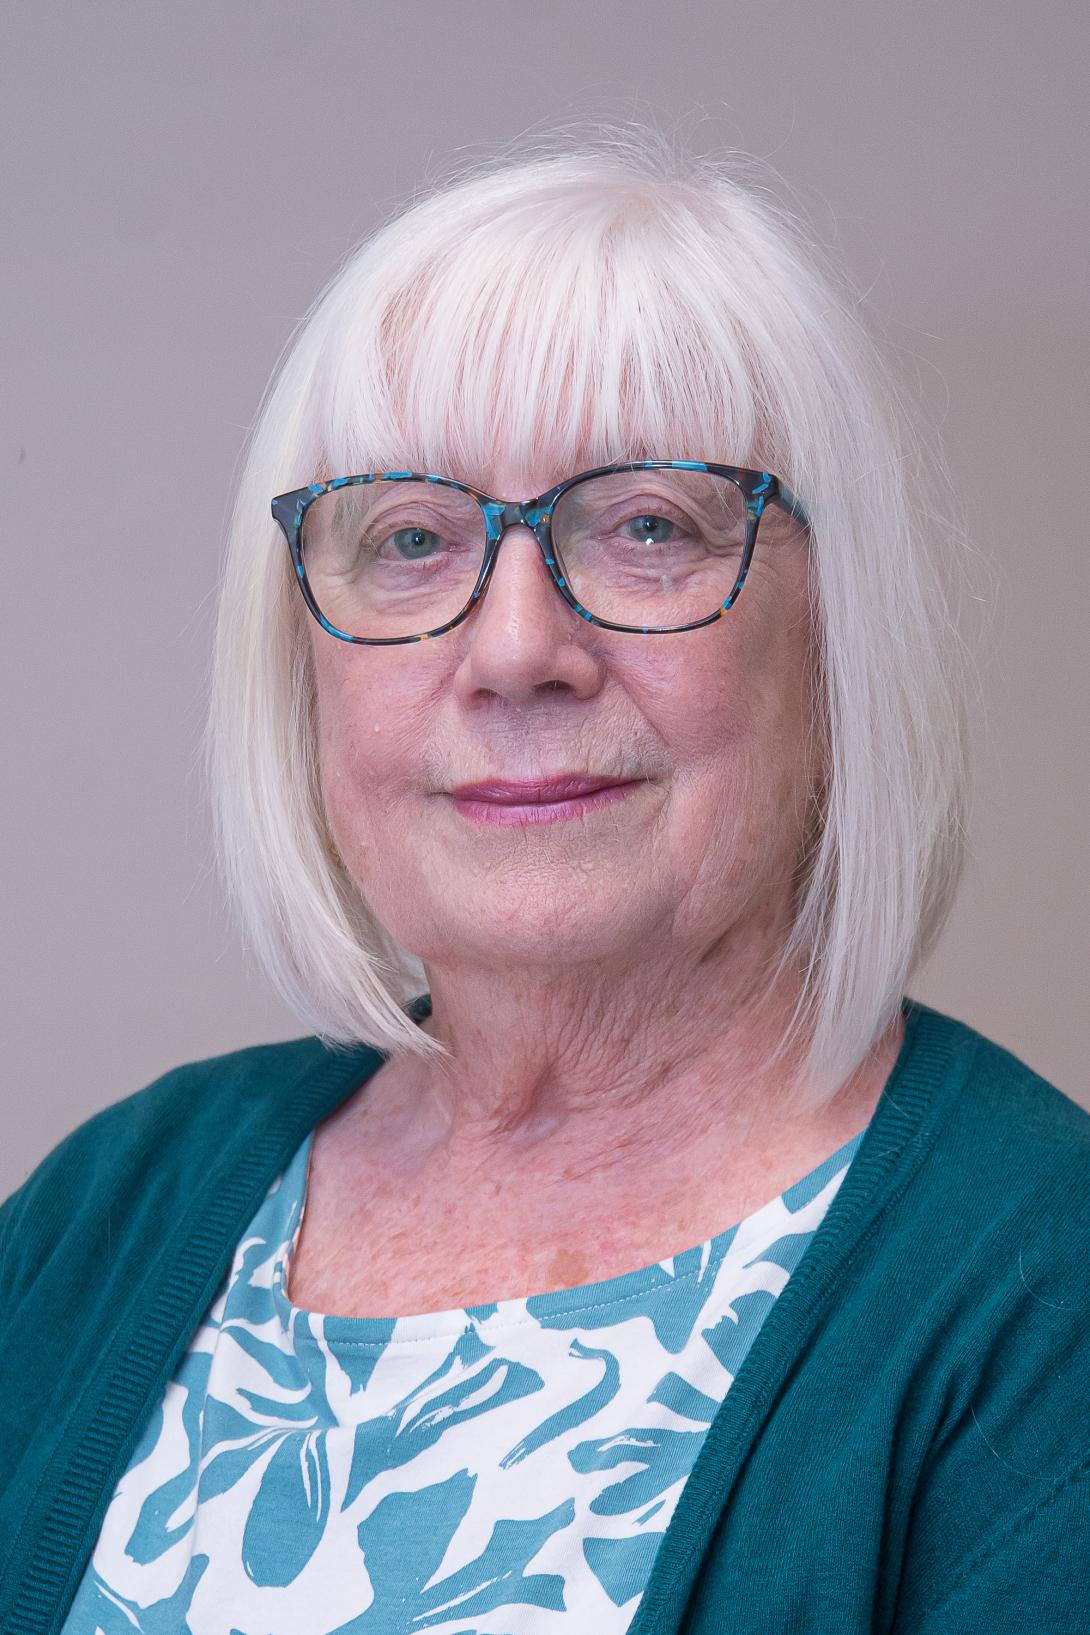 Valerie Ball is wearing glasses, a white and green patterned top and green cardigan